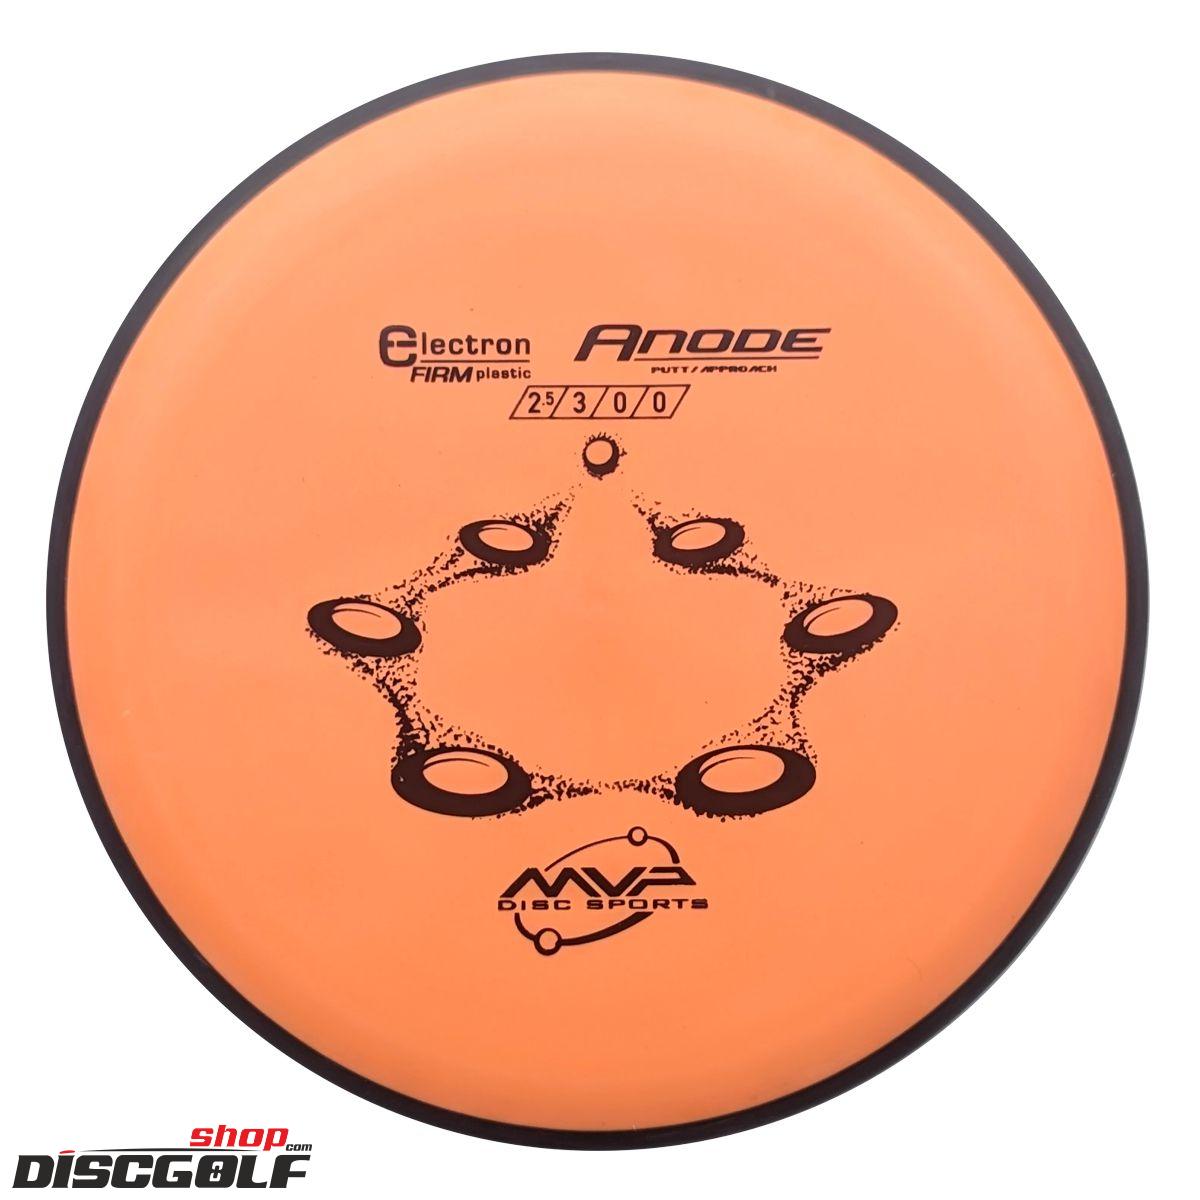 MVP Anode Electron Firm (discgolf)